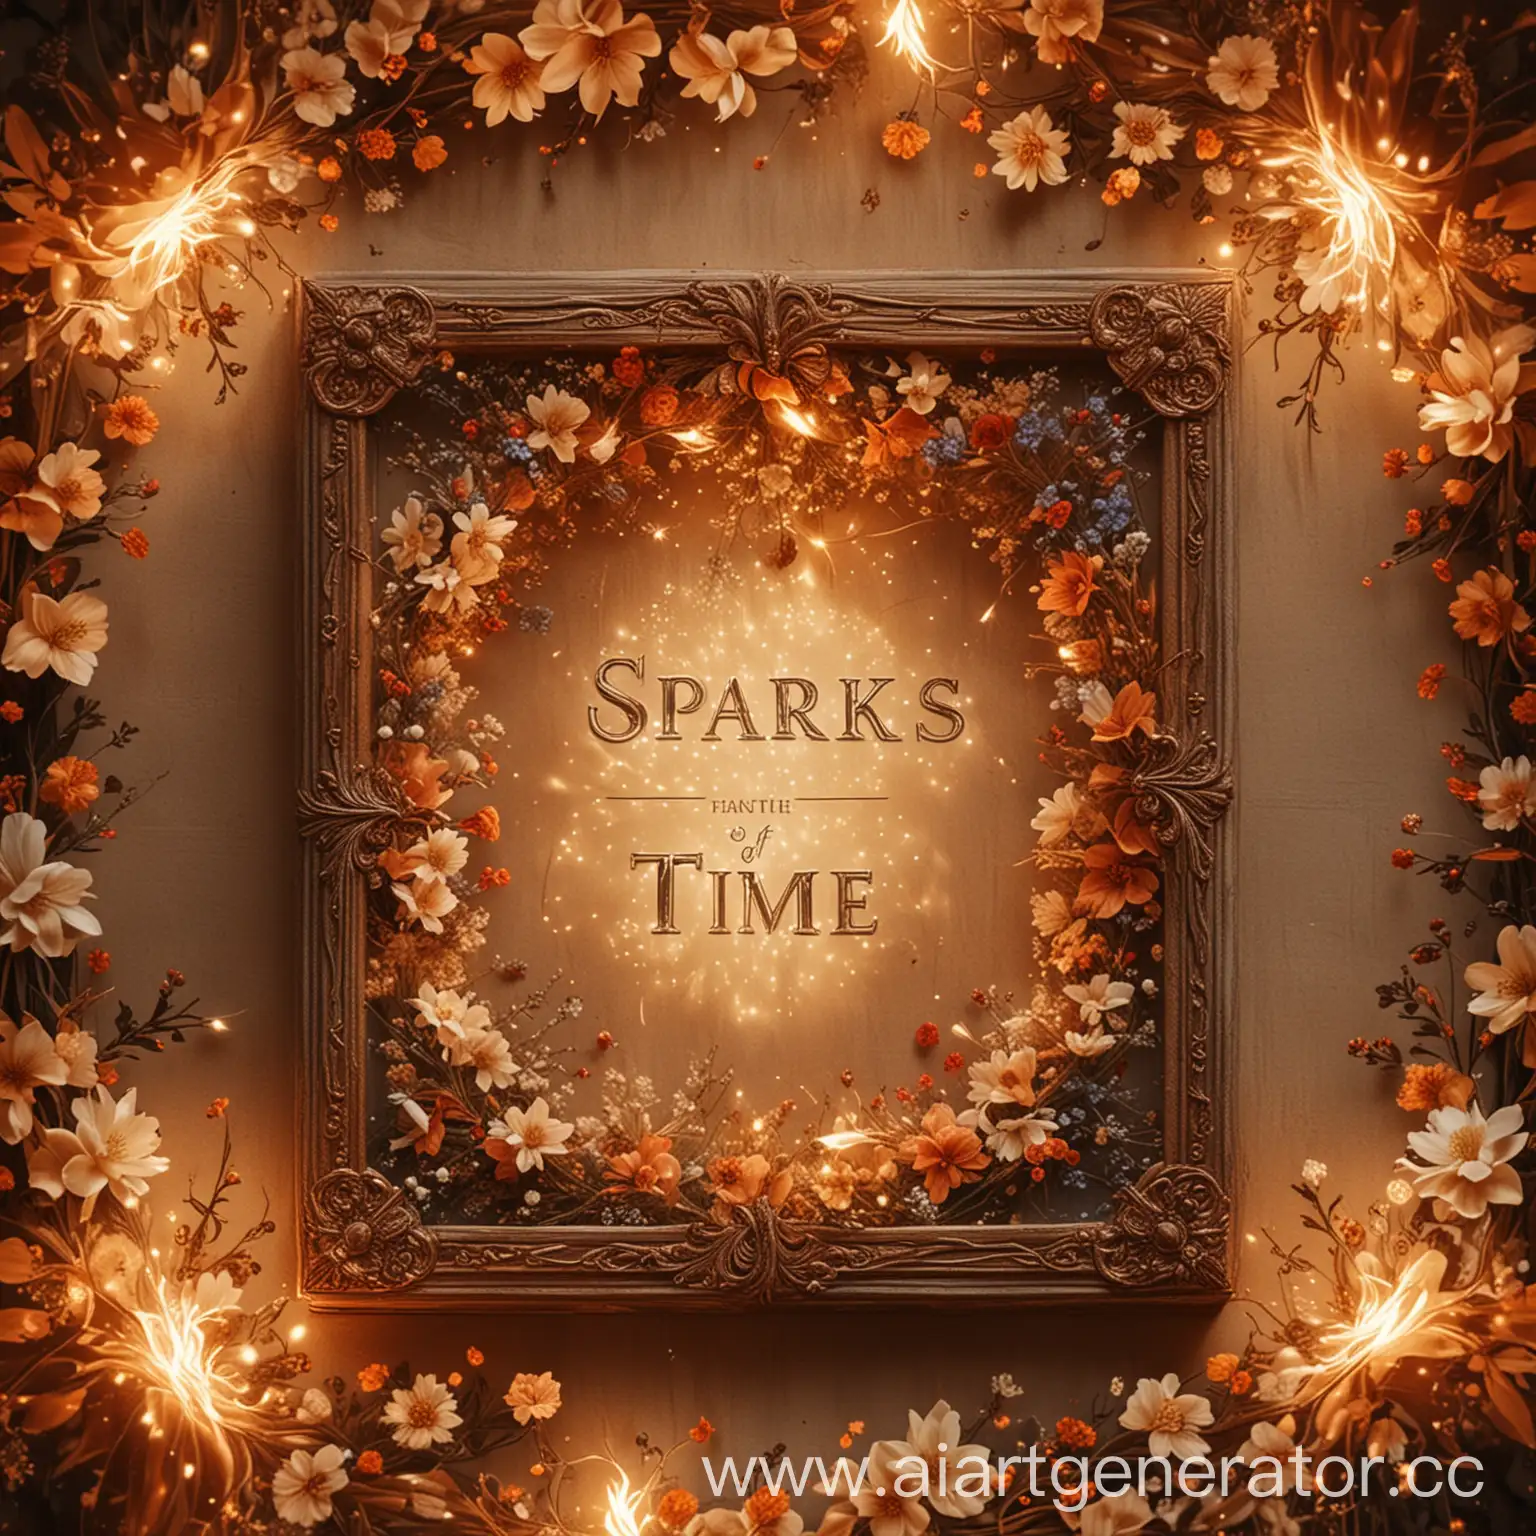 Floral-Ornaments-Surrounding-Sparks-of-Time-in-WarmToned-Poetry-Cover